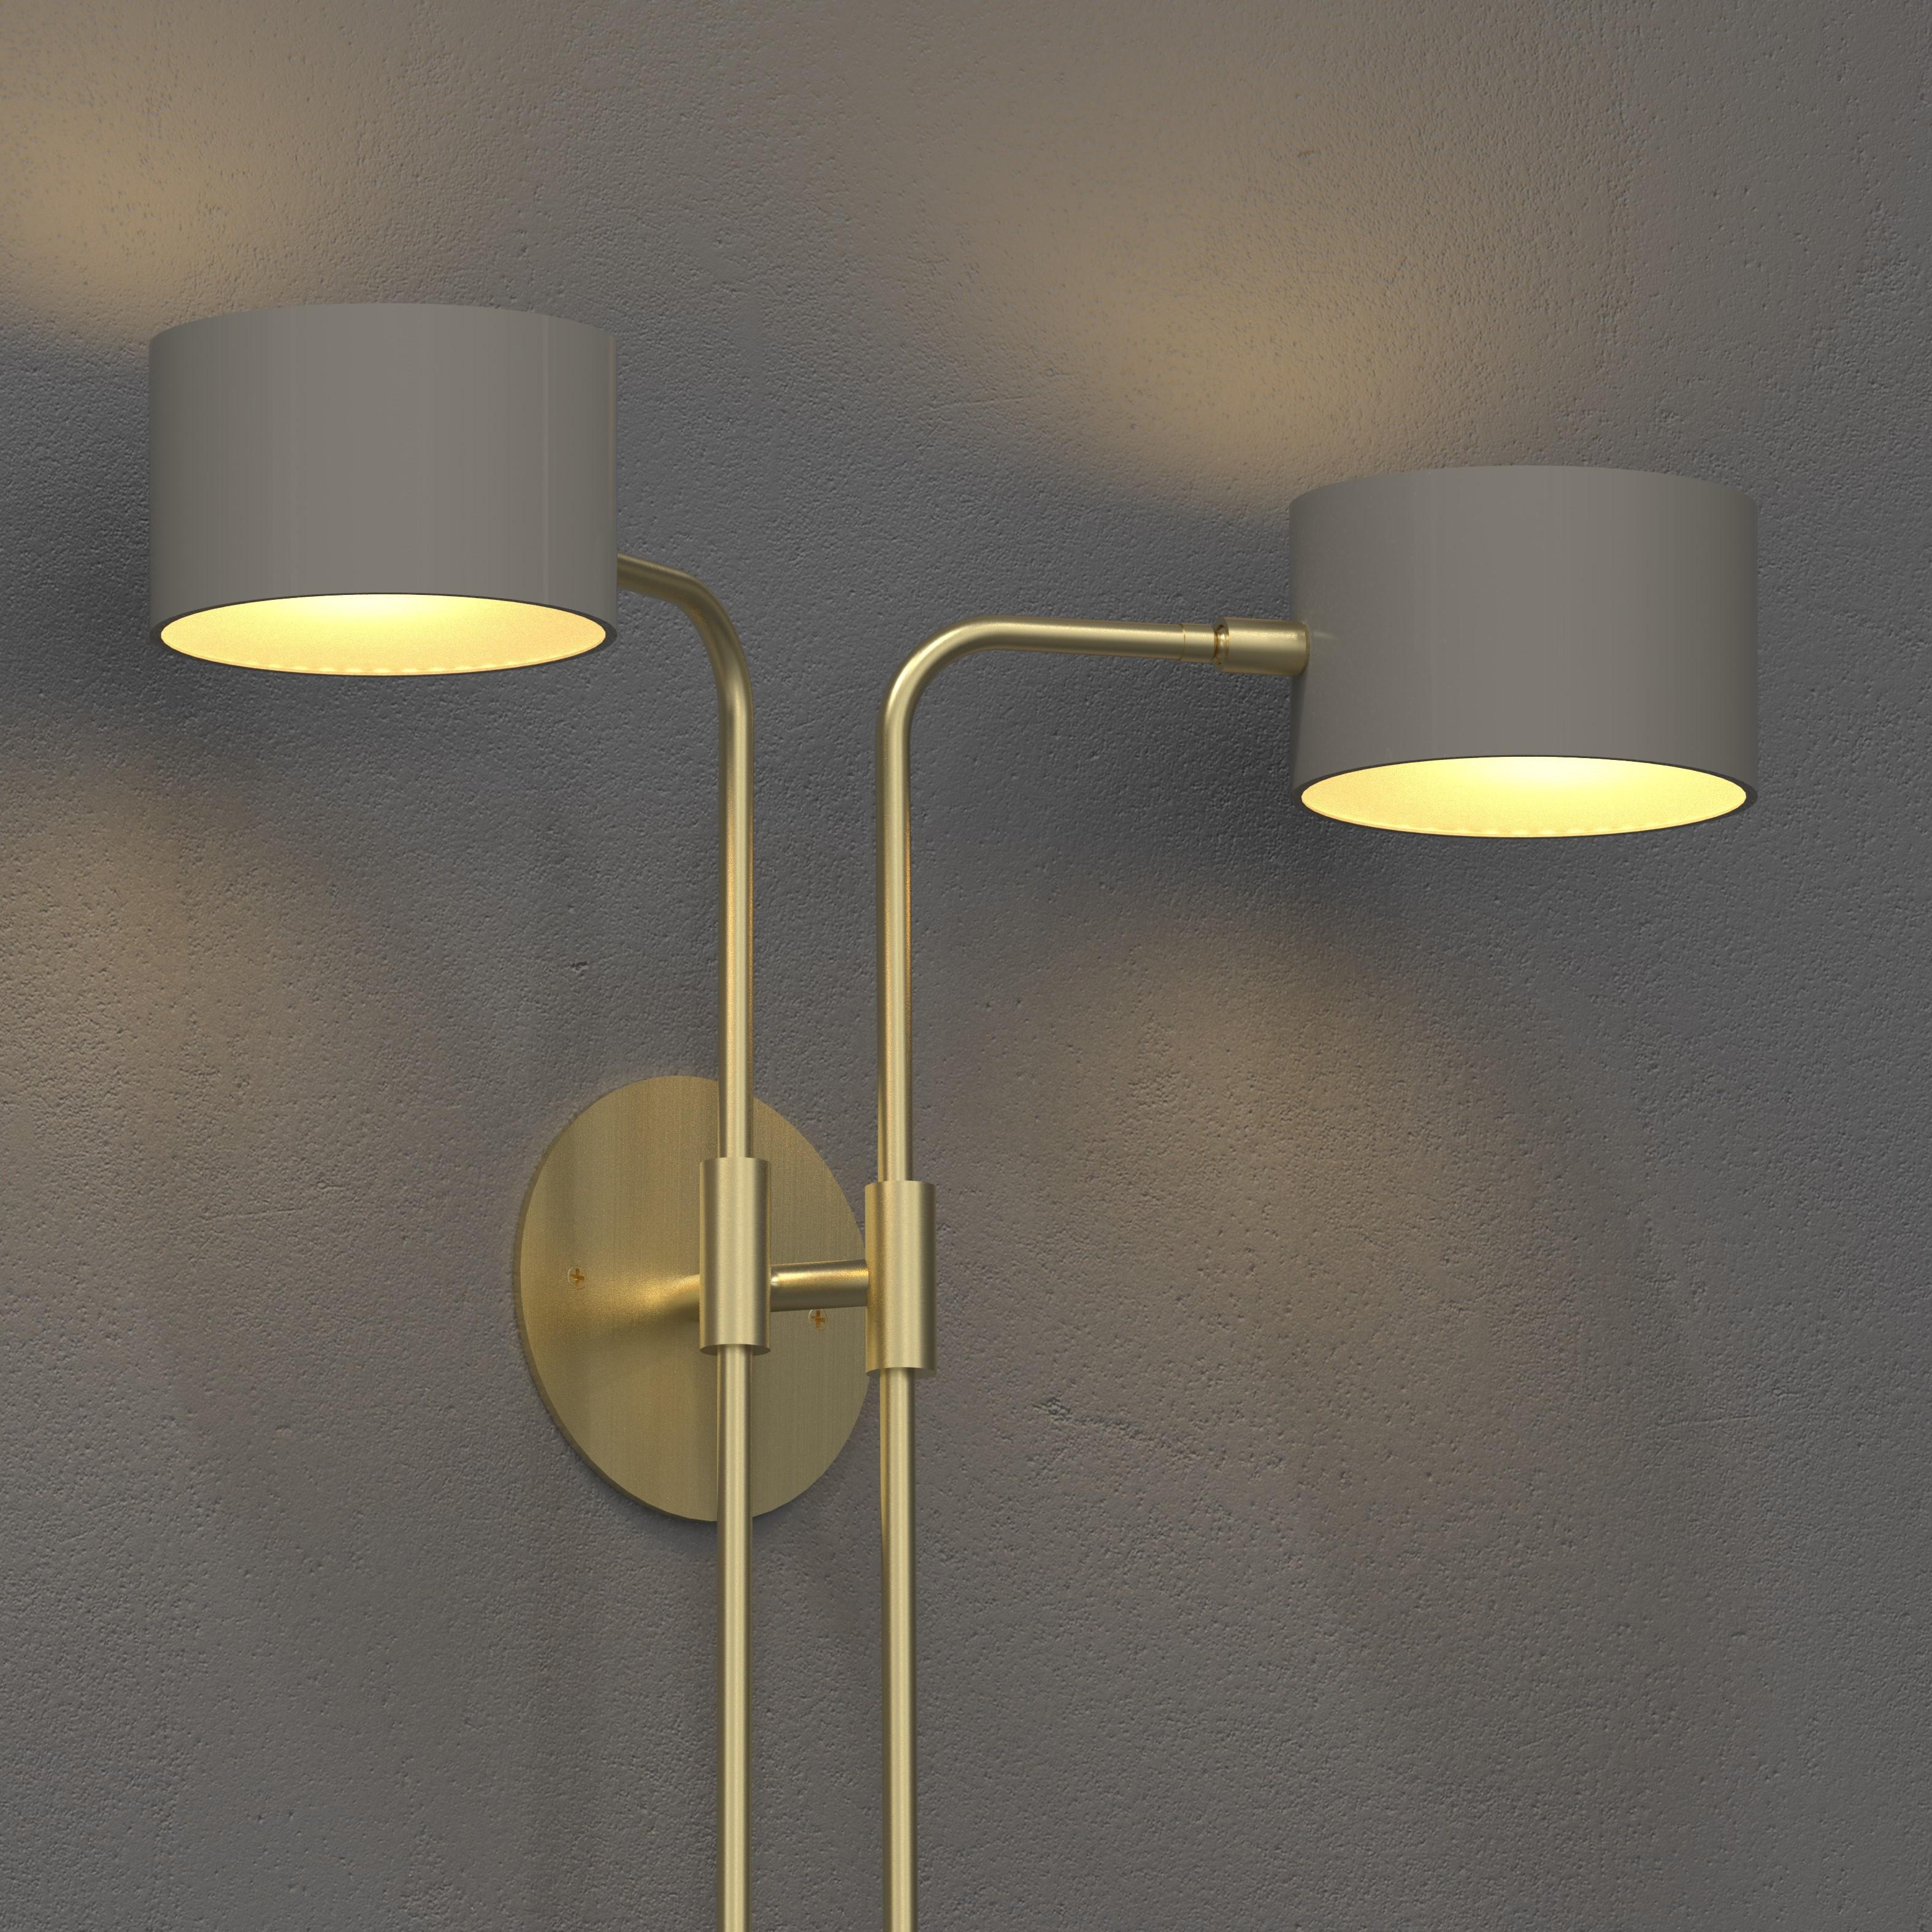 American Cilindro 2 Wall Light in Enamel & Brass by Blueprint Lighting For Sale